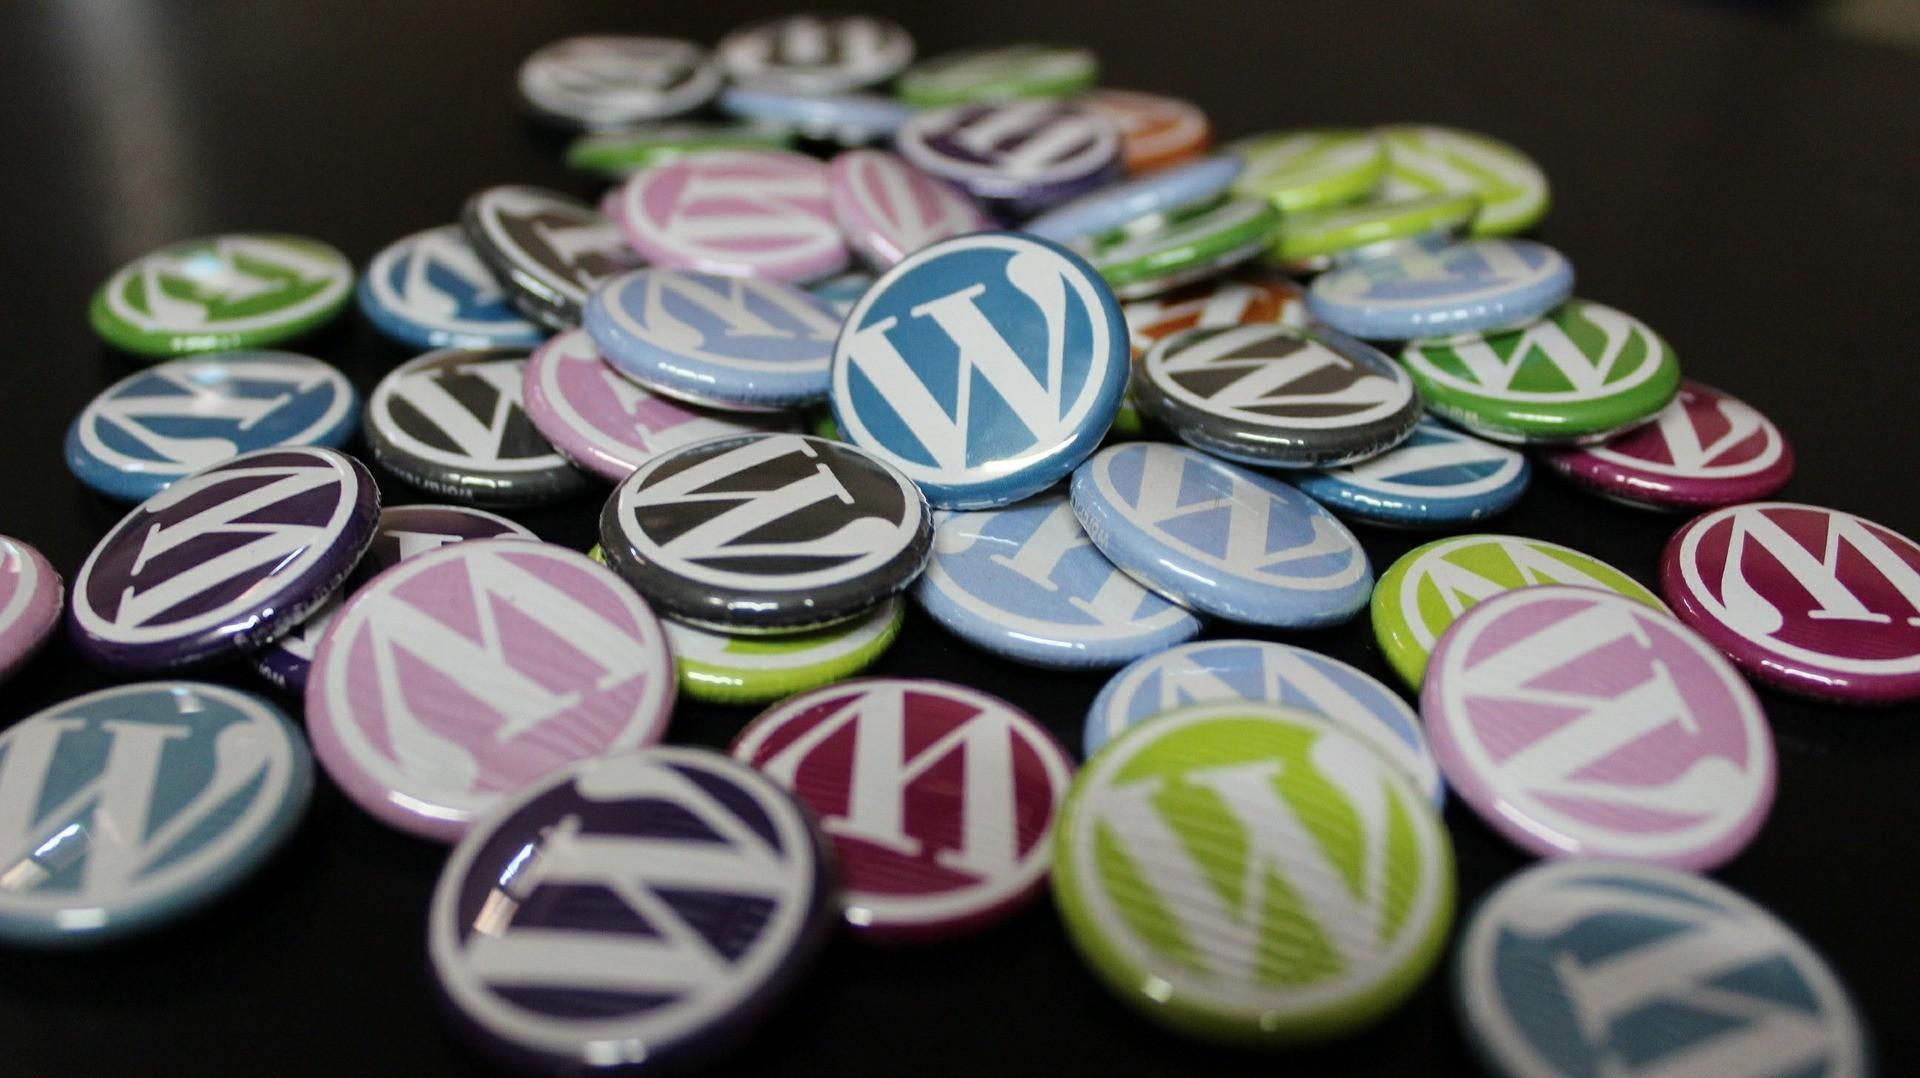 WordPress 5.6 is out